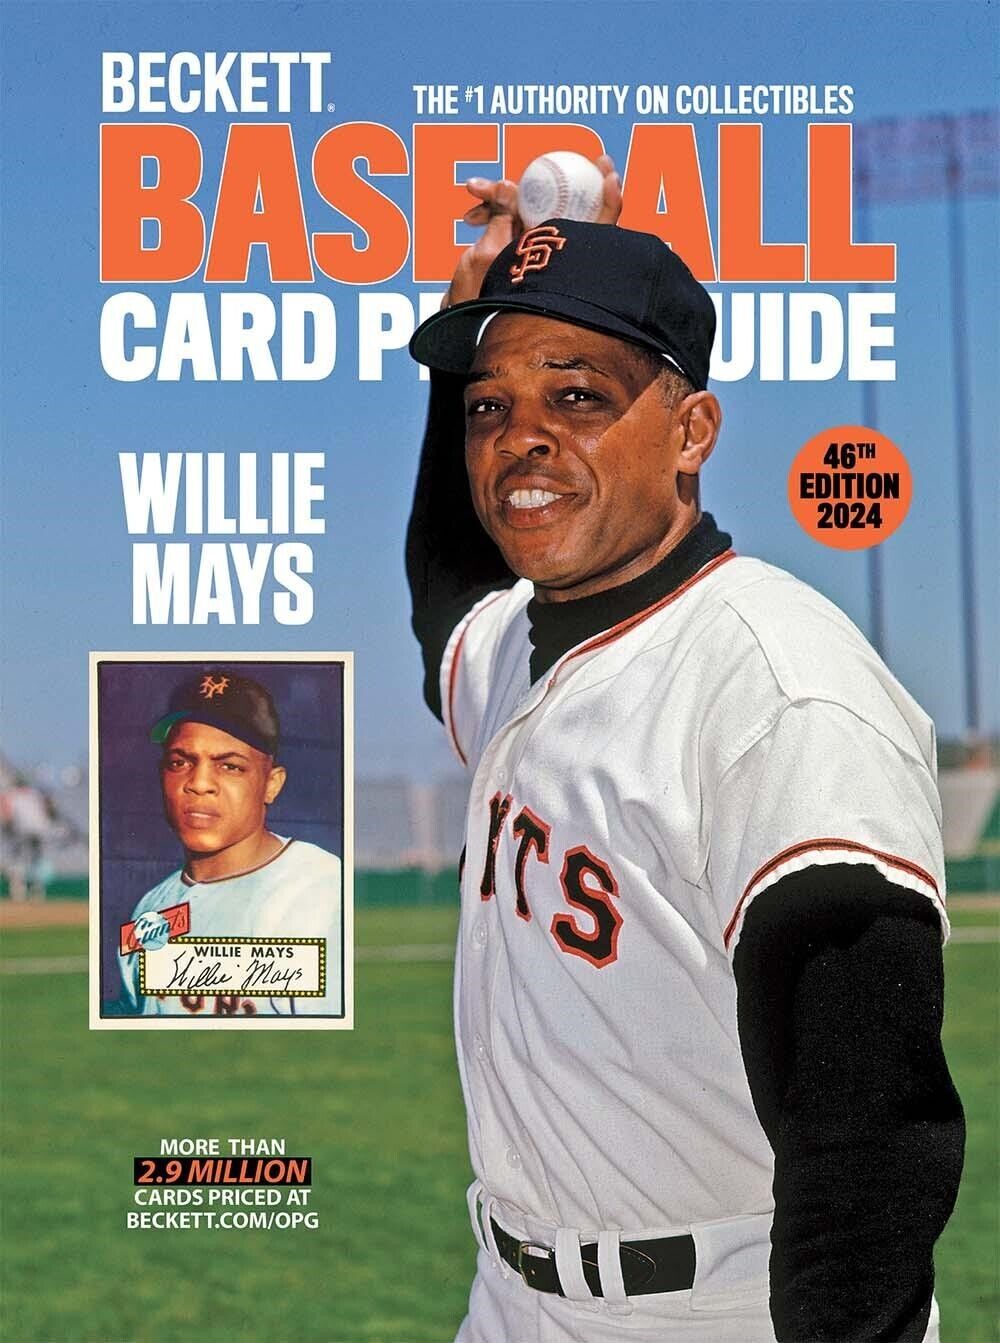 New 2024 Beckett Baseball Card Price Guide Catalog 46th Edition W WILLIE MAYS